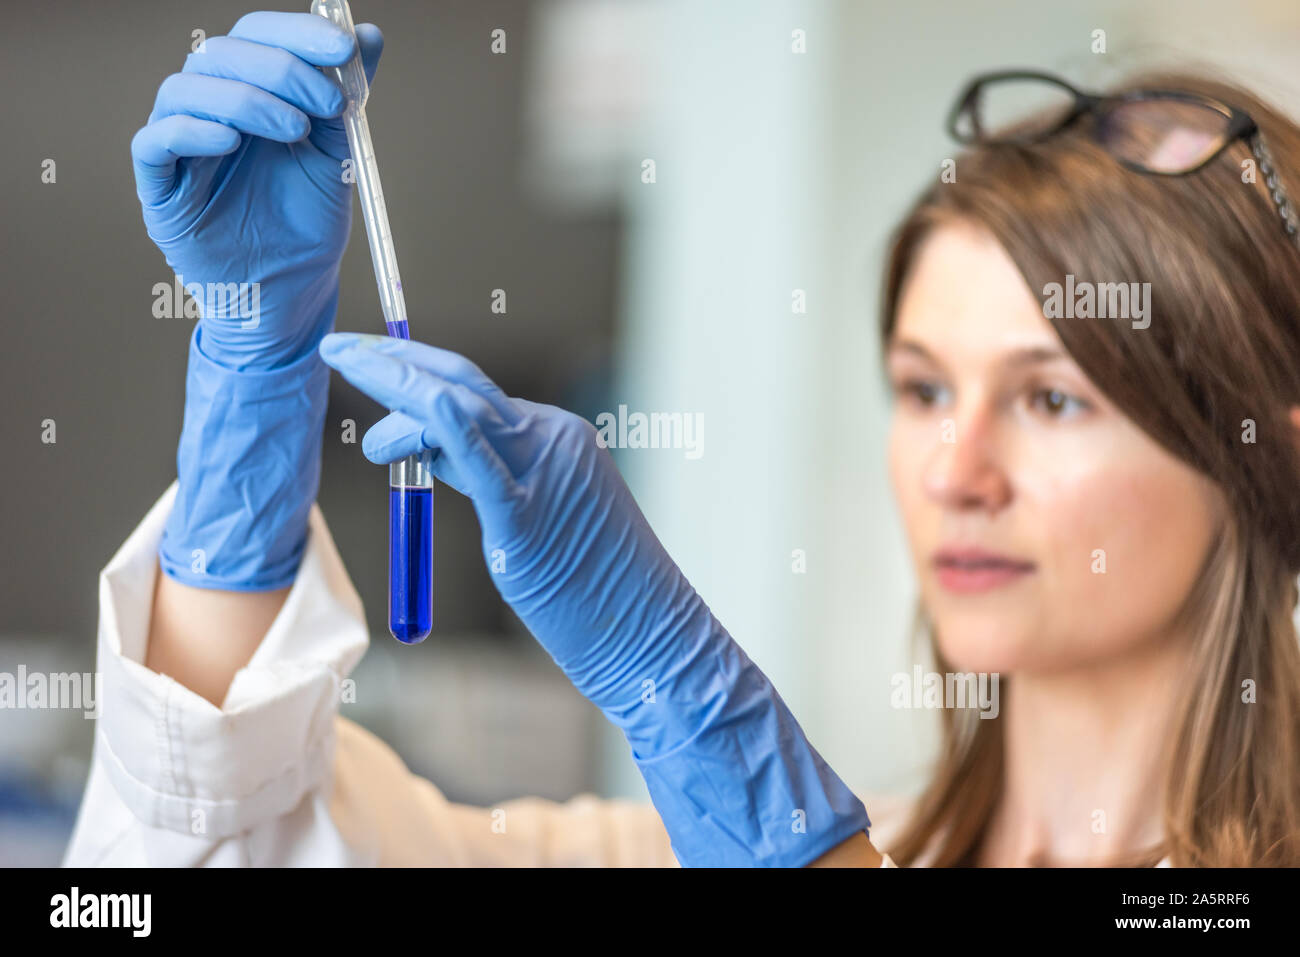 Woman in science: woman researcher working in biomedical research laboratory Stock Photo